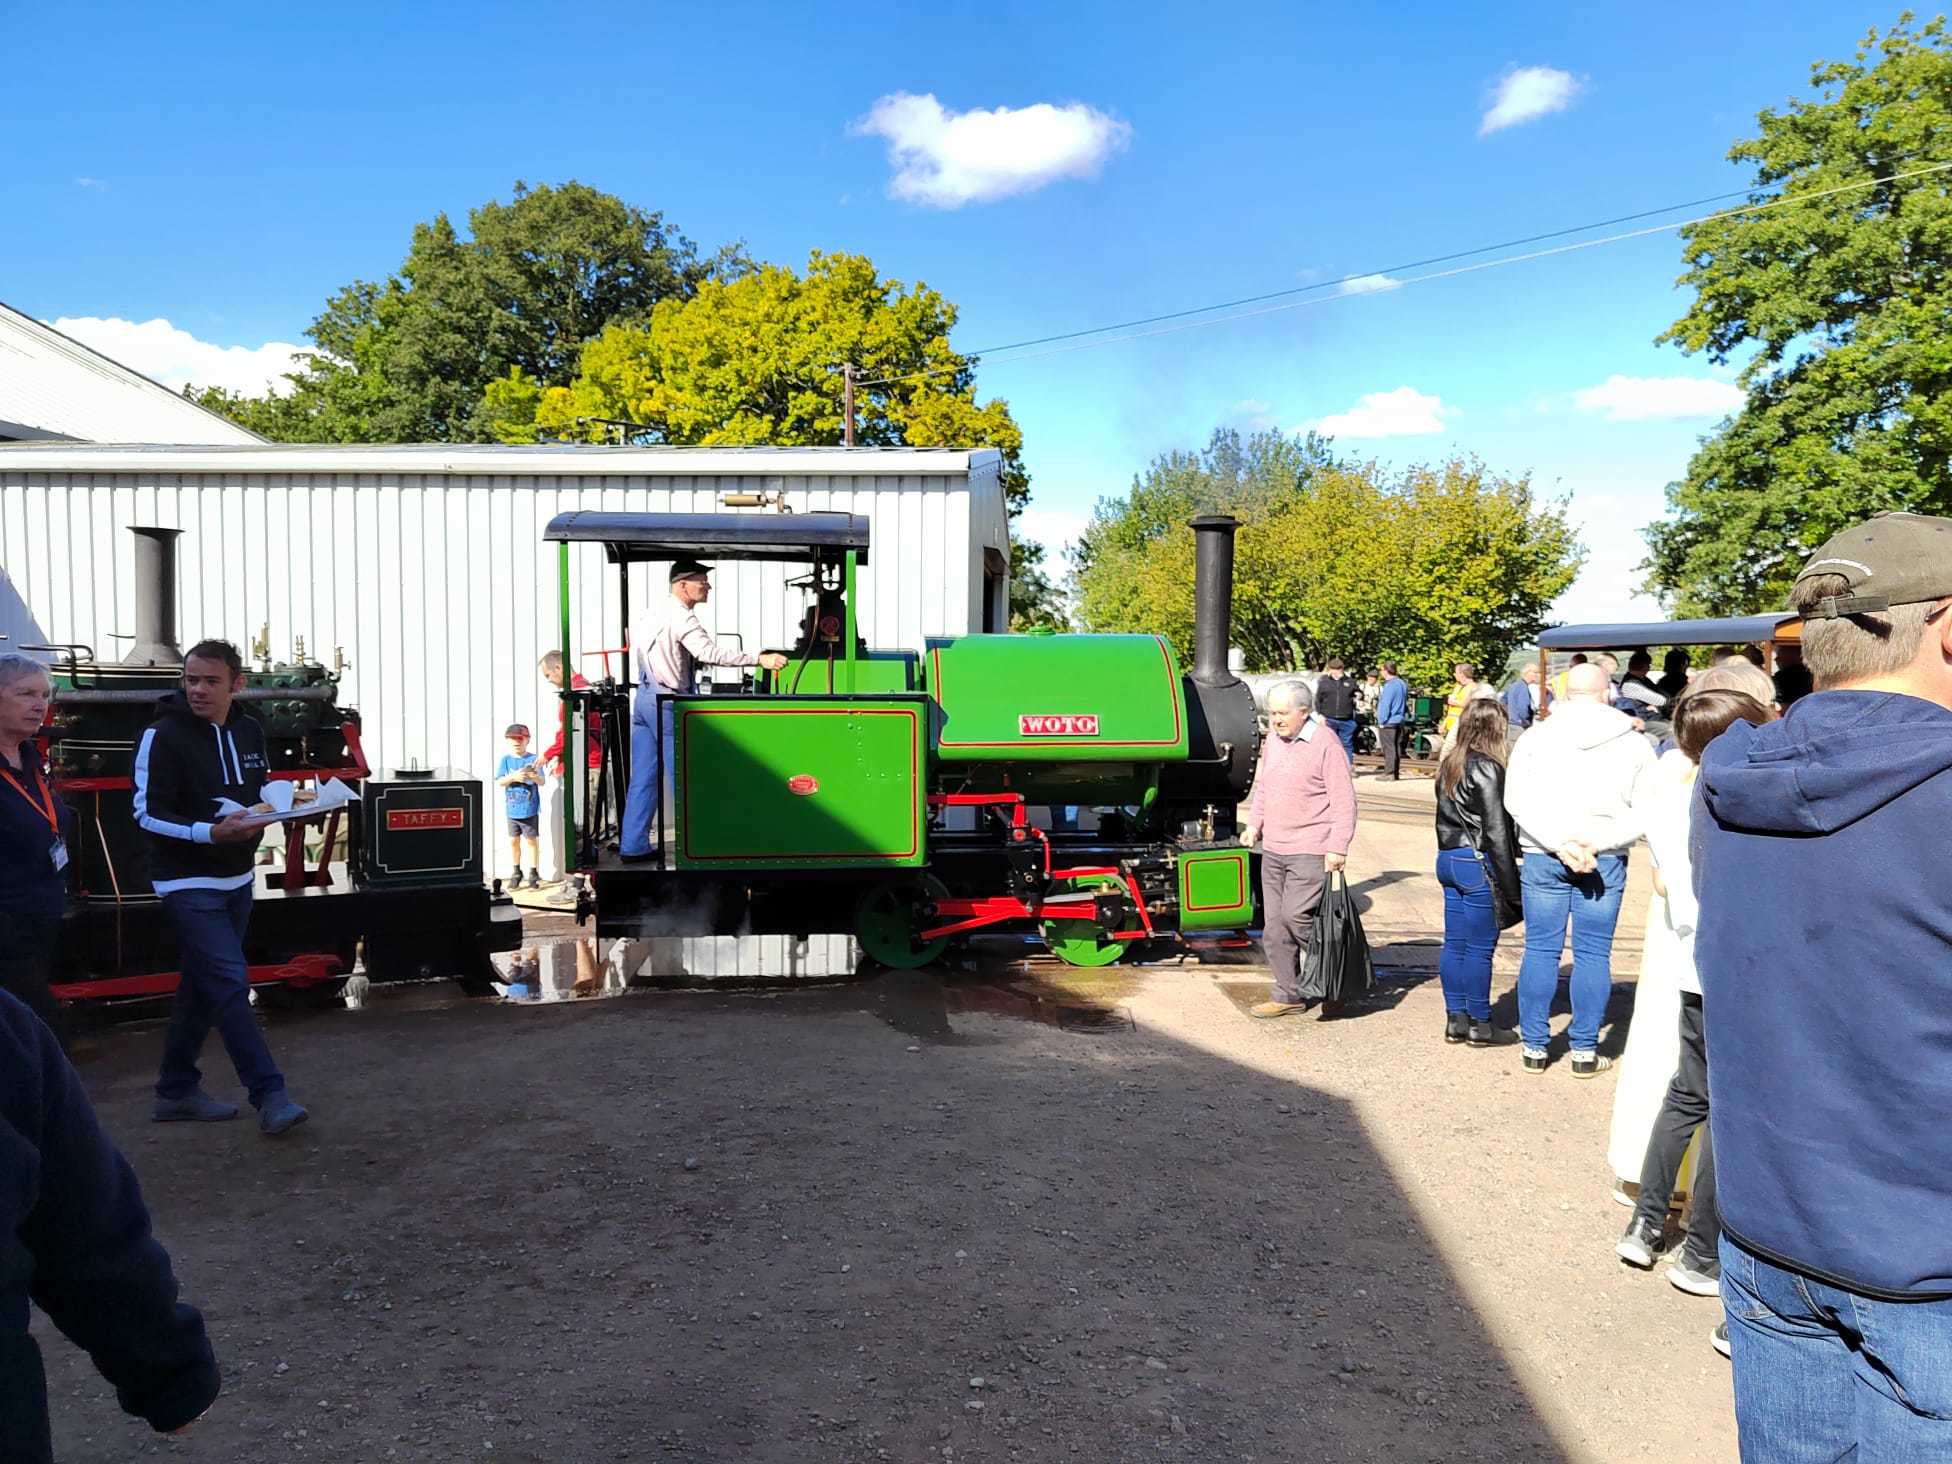 One of the engines on show at the Alan Keef Ltd open day at Lea, near Ross-on-Wye, Herefordshire. Picture: David Prior